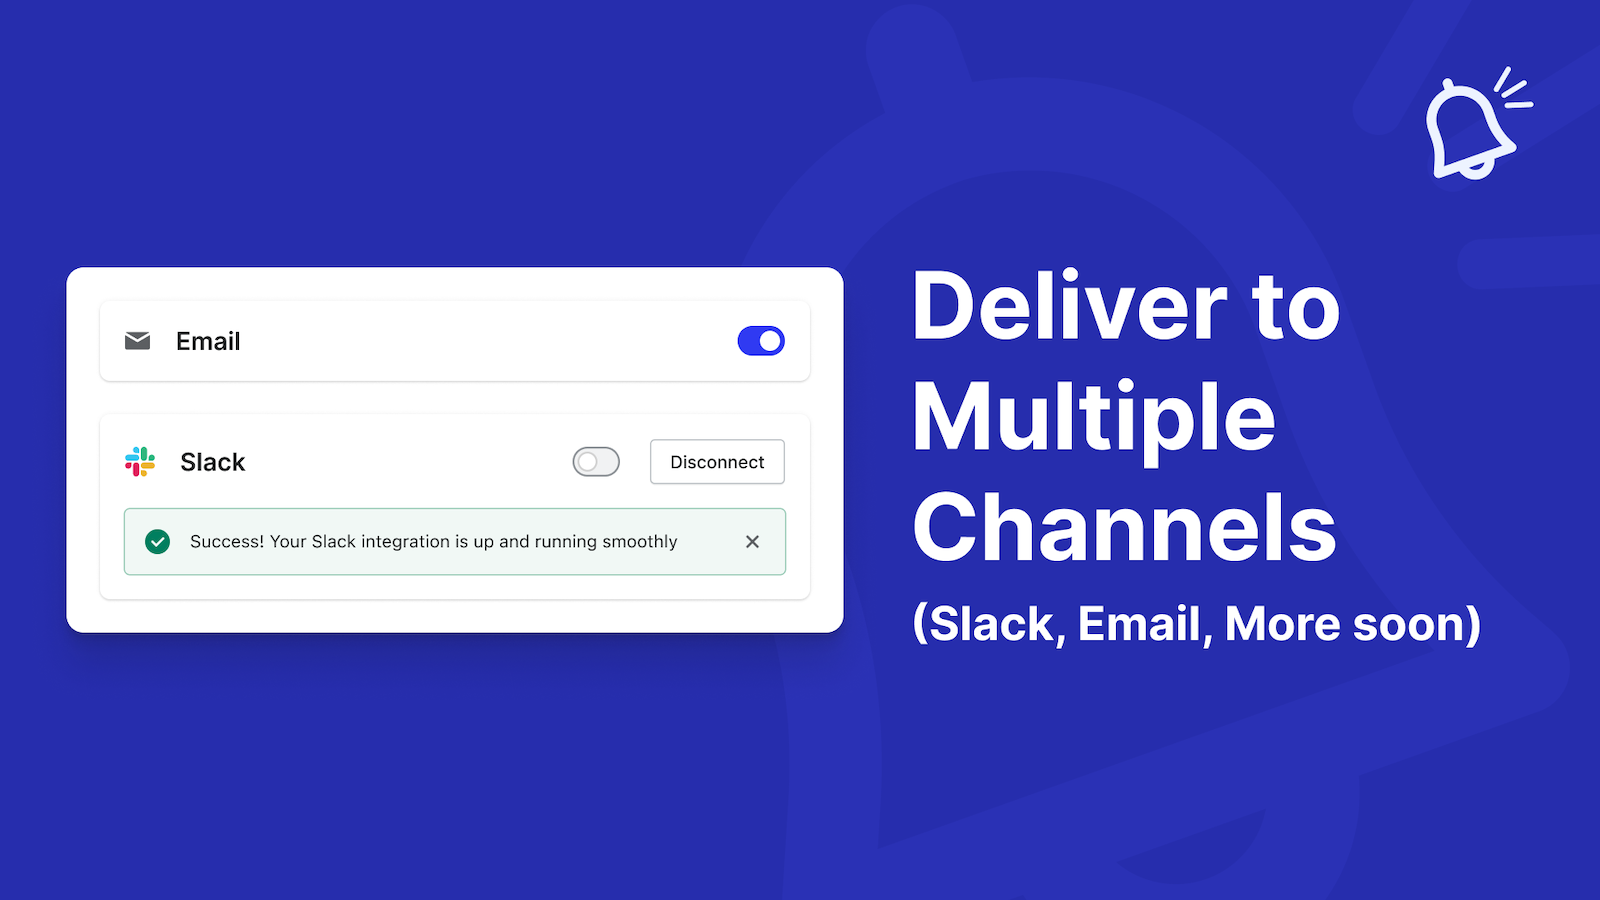 Deliver to Multiple Channels